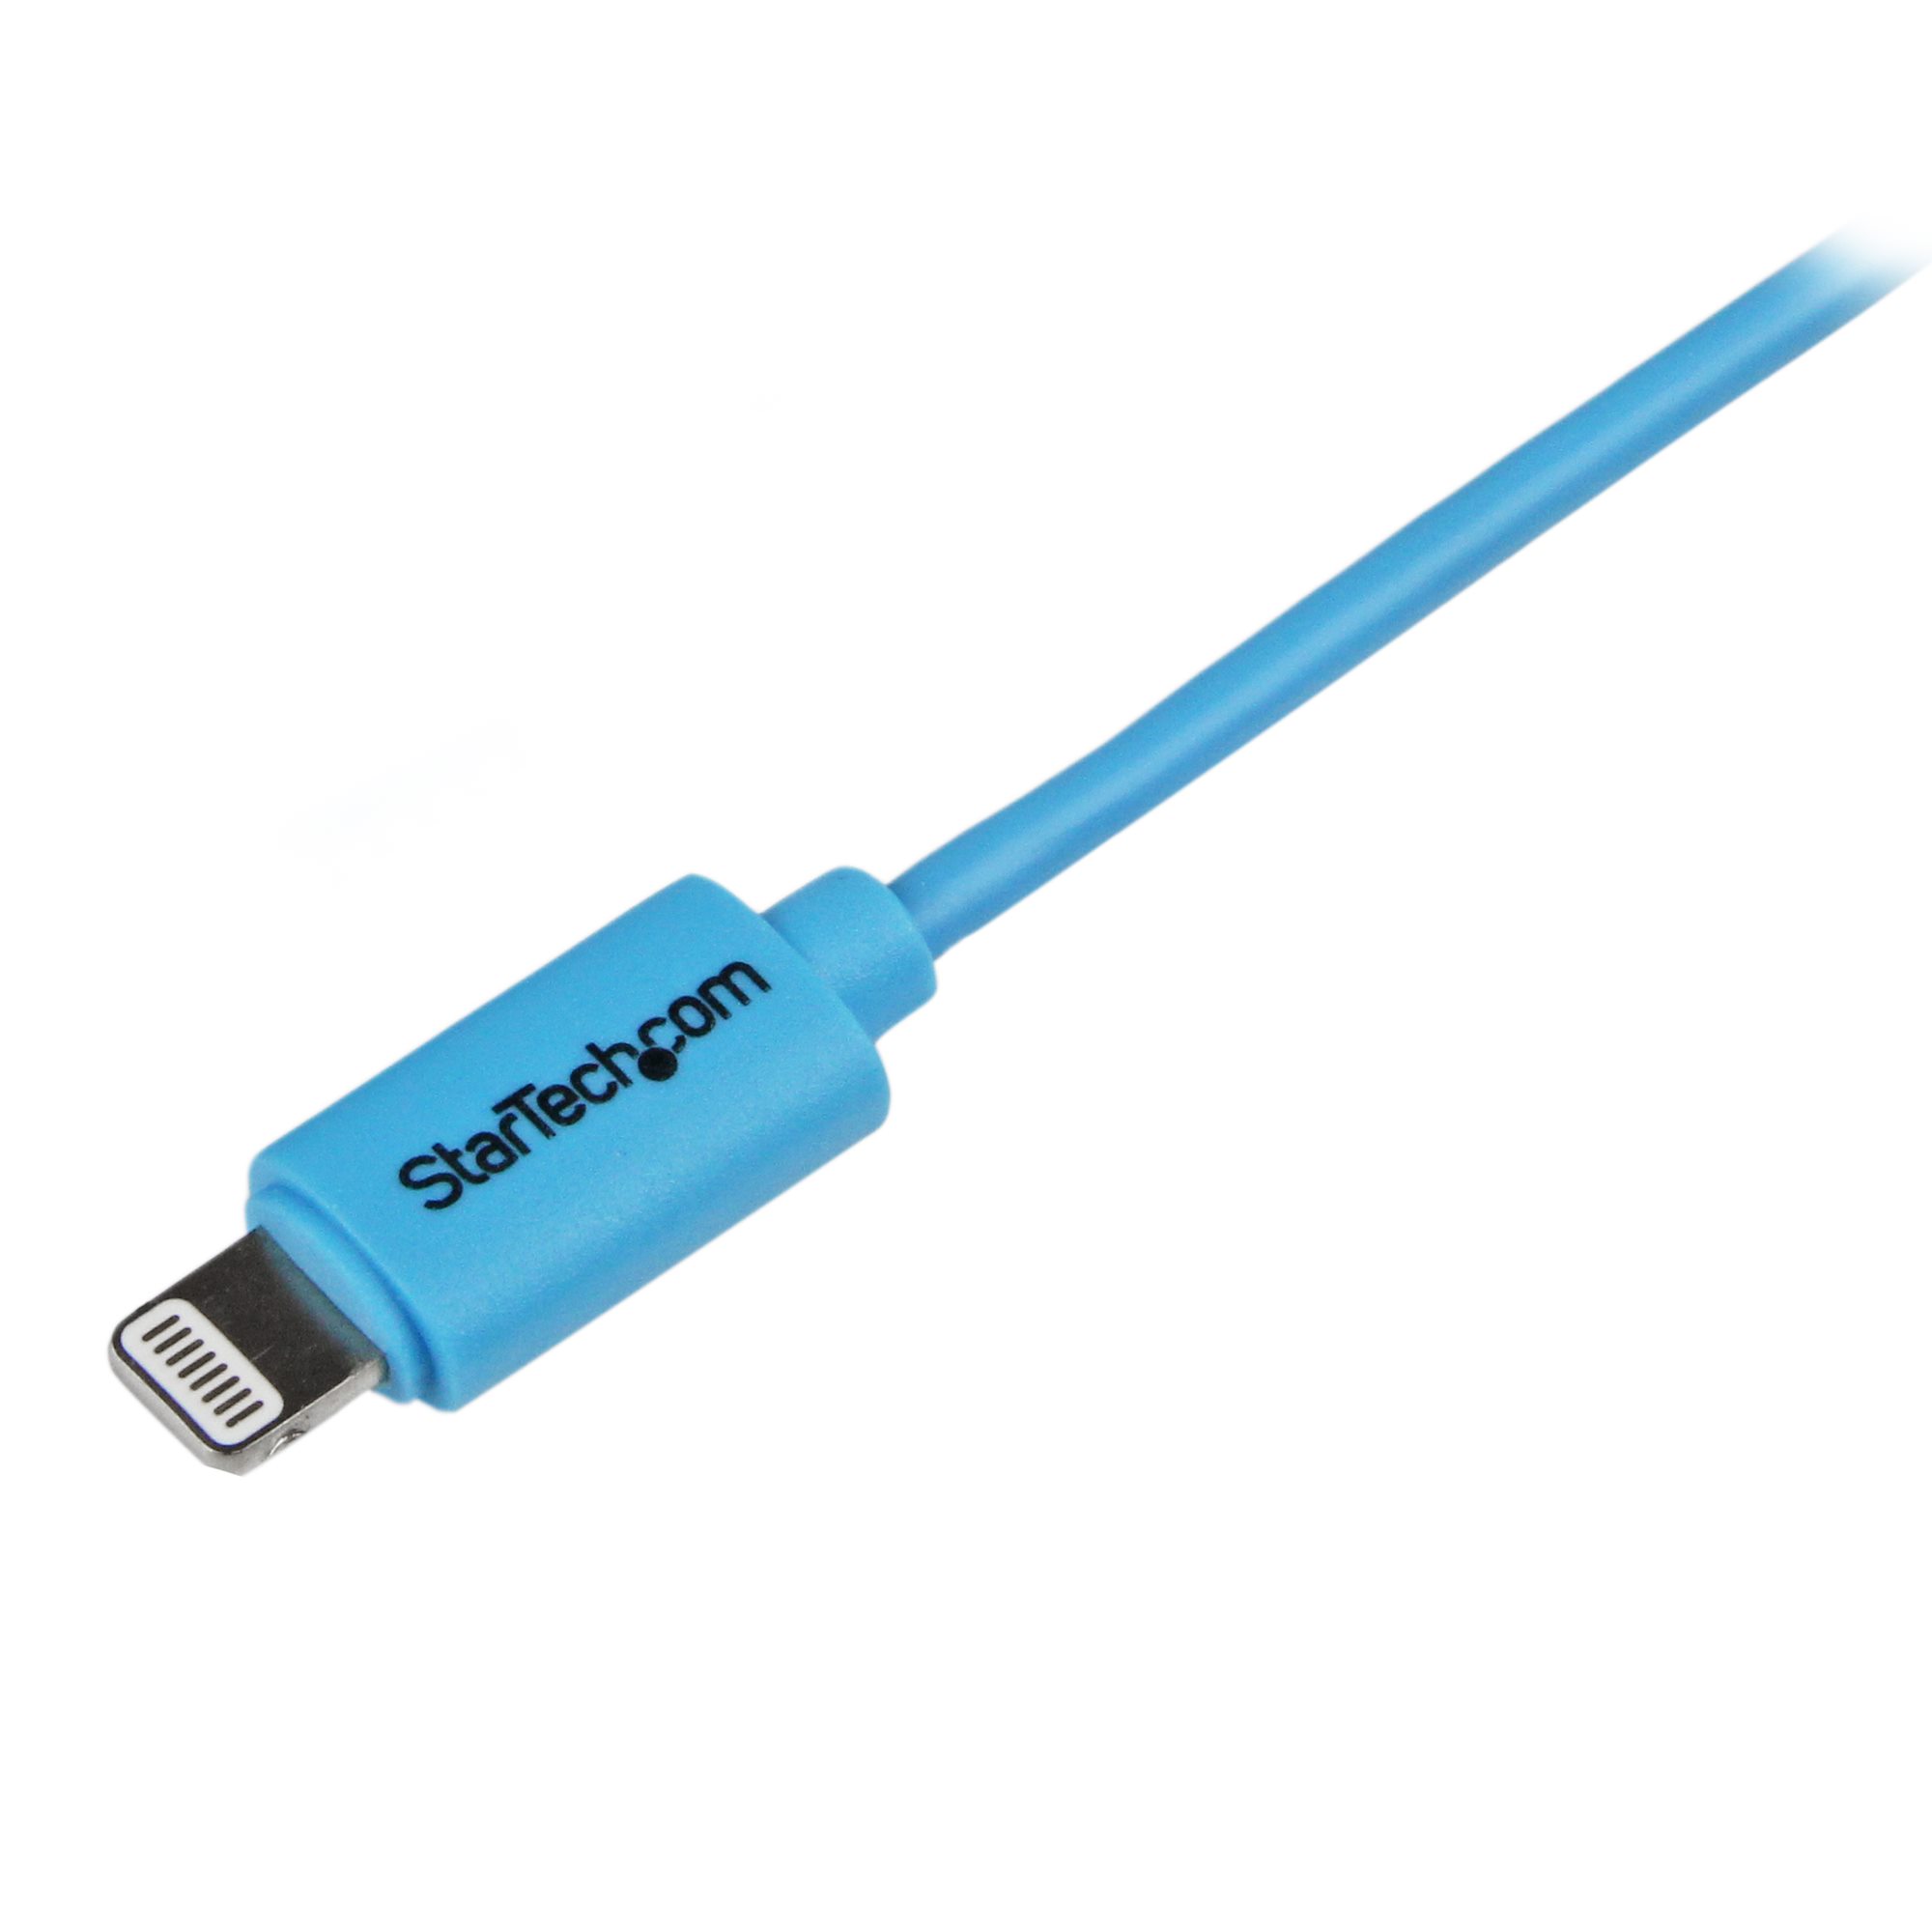 1m Blue 8-pin Lightning to USB Cable - Lightning Cables 